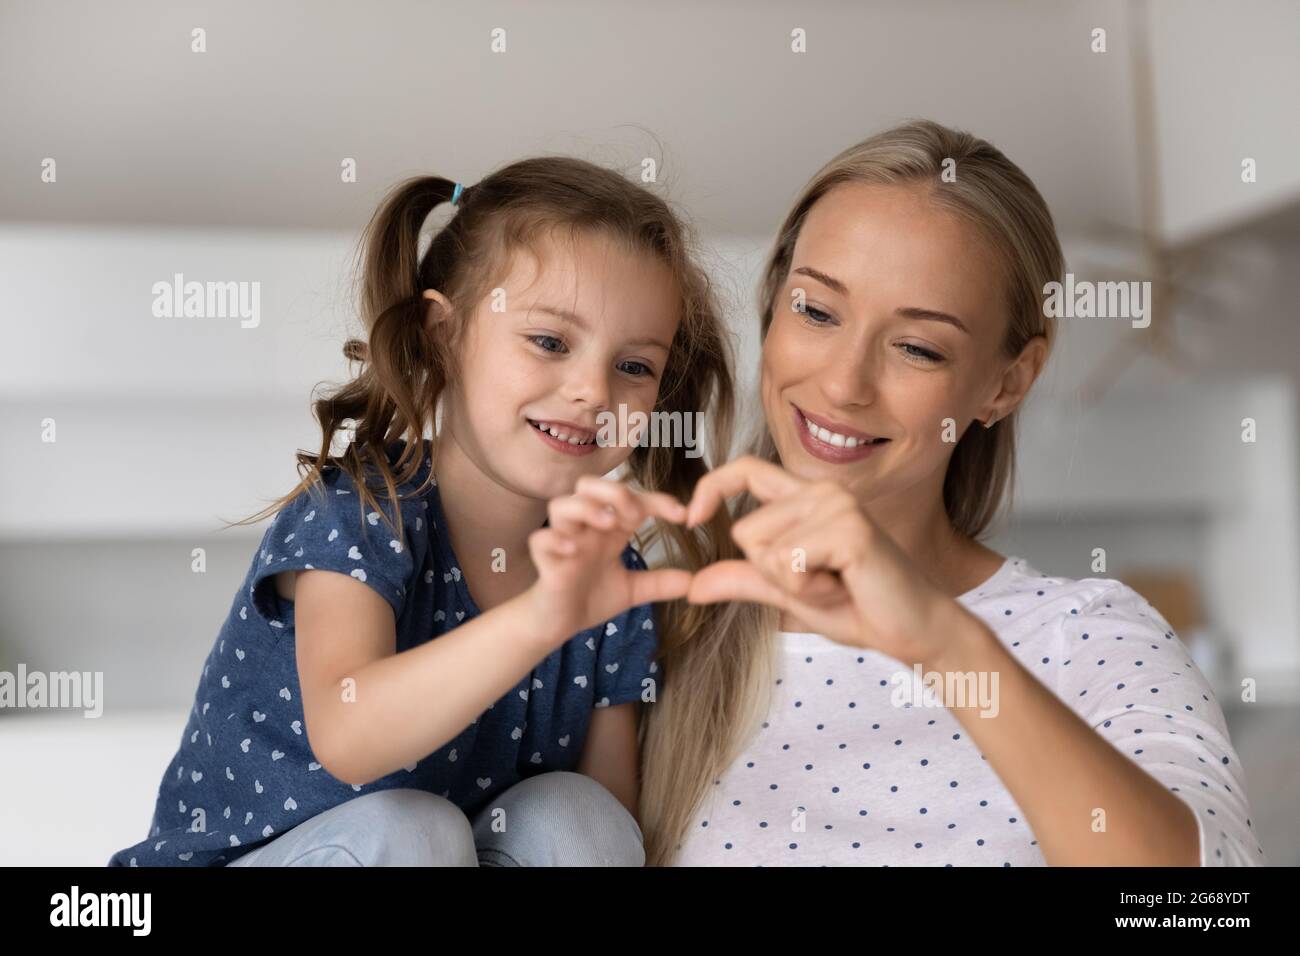 Smiling loving mother with adorable little daughter showing heart gesture Stock Photo